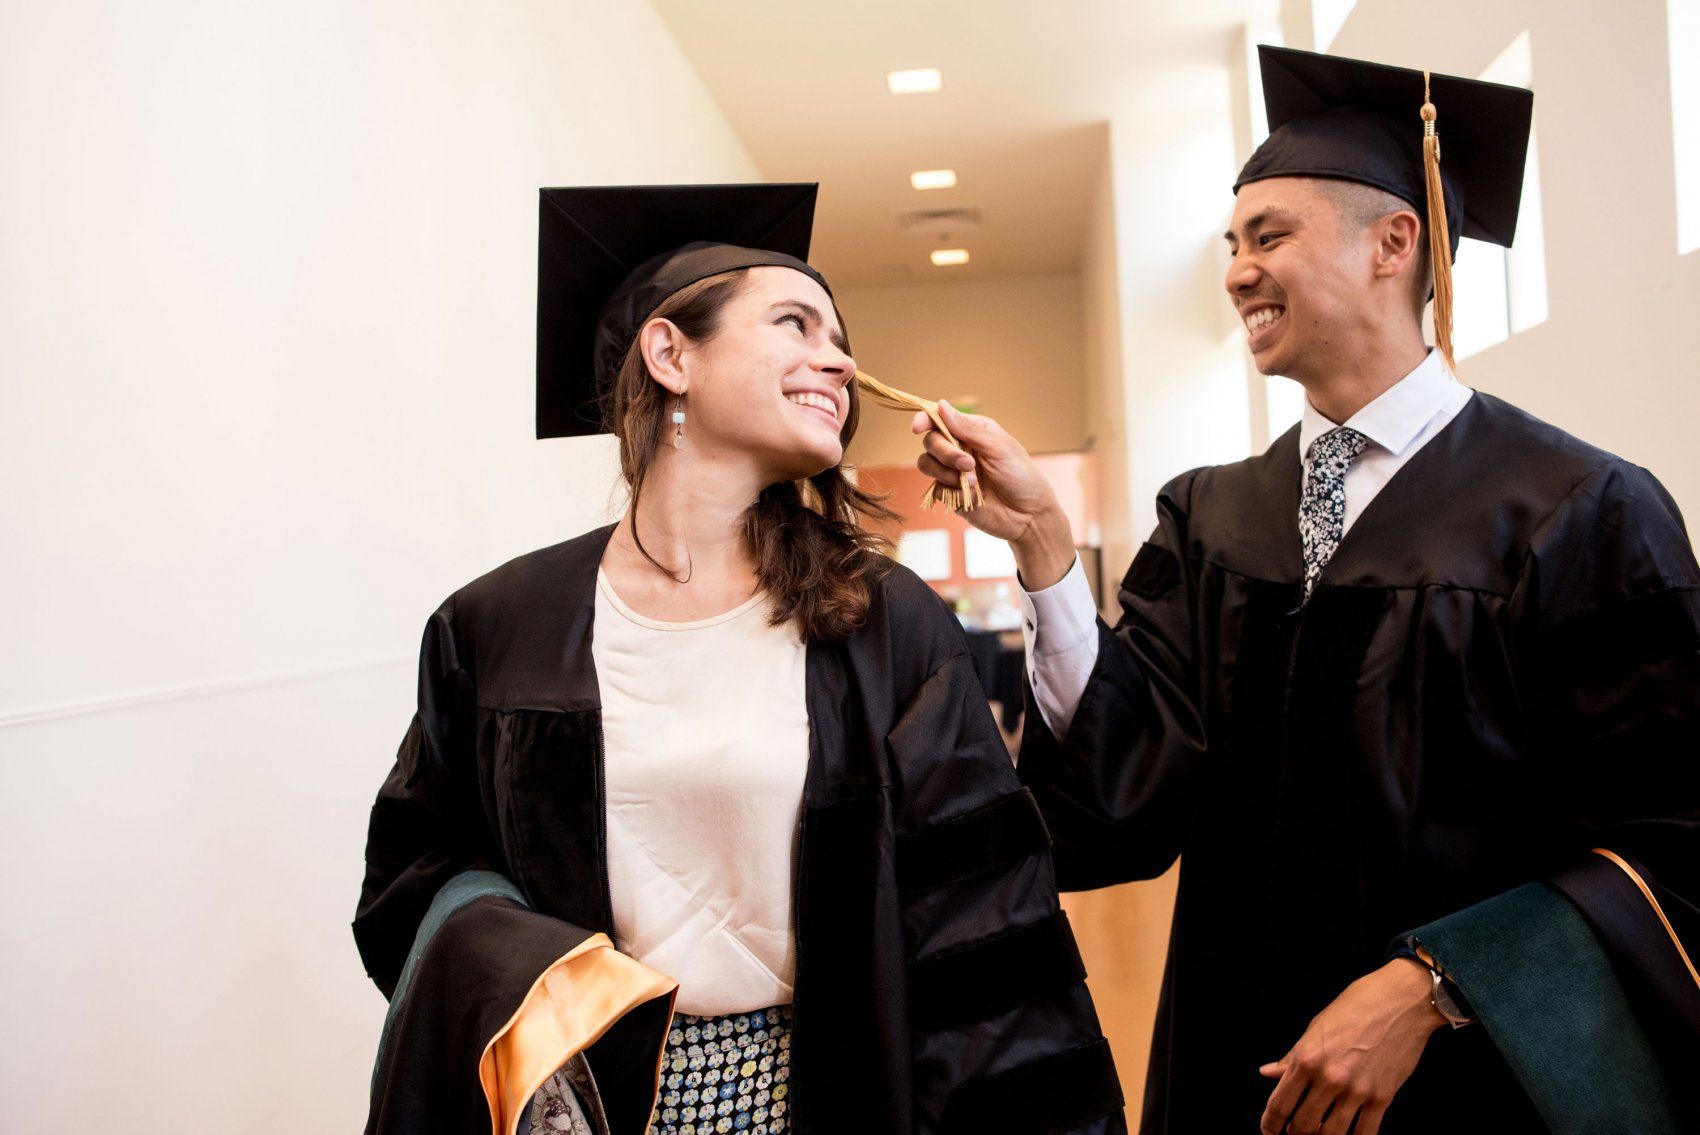 Two students joking before commencement ceremony